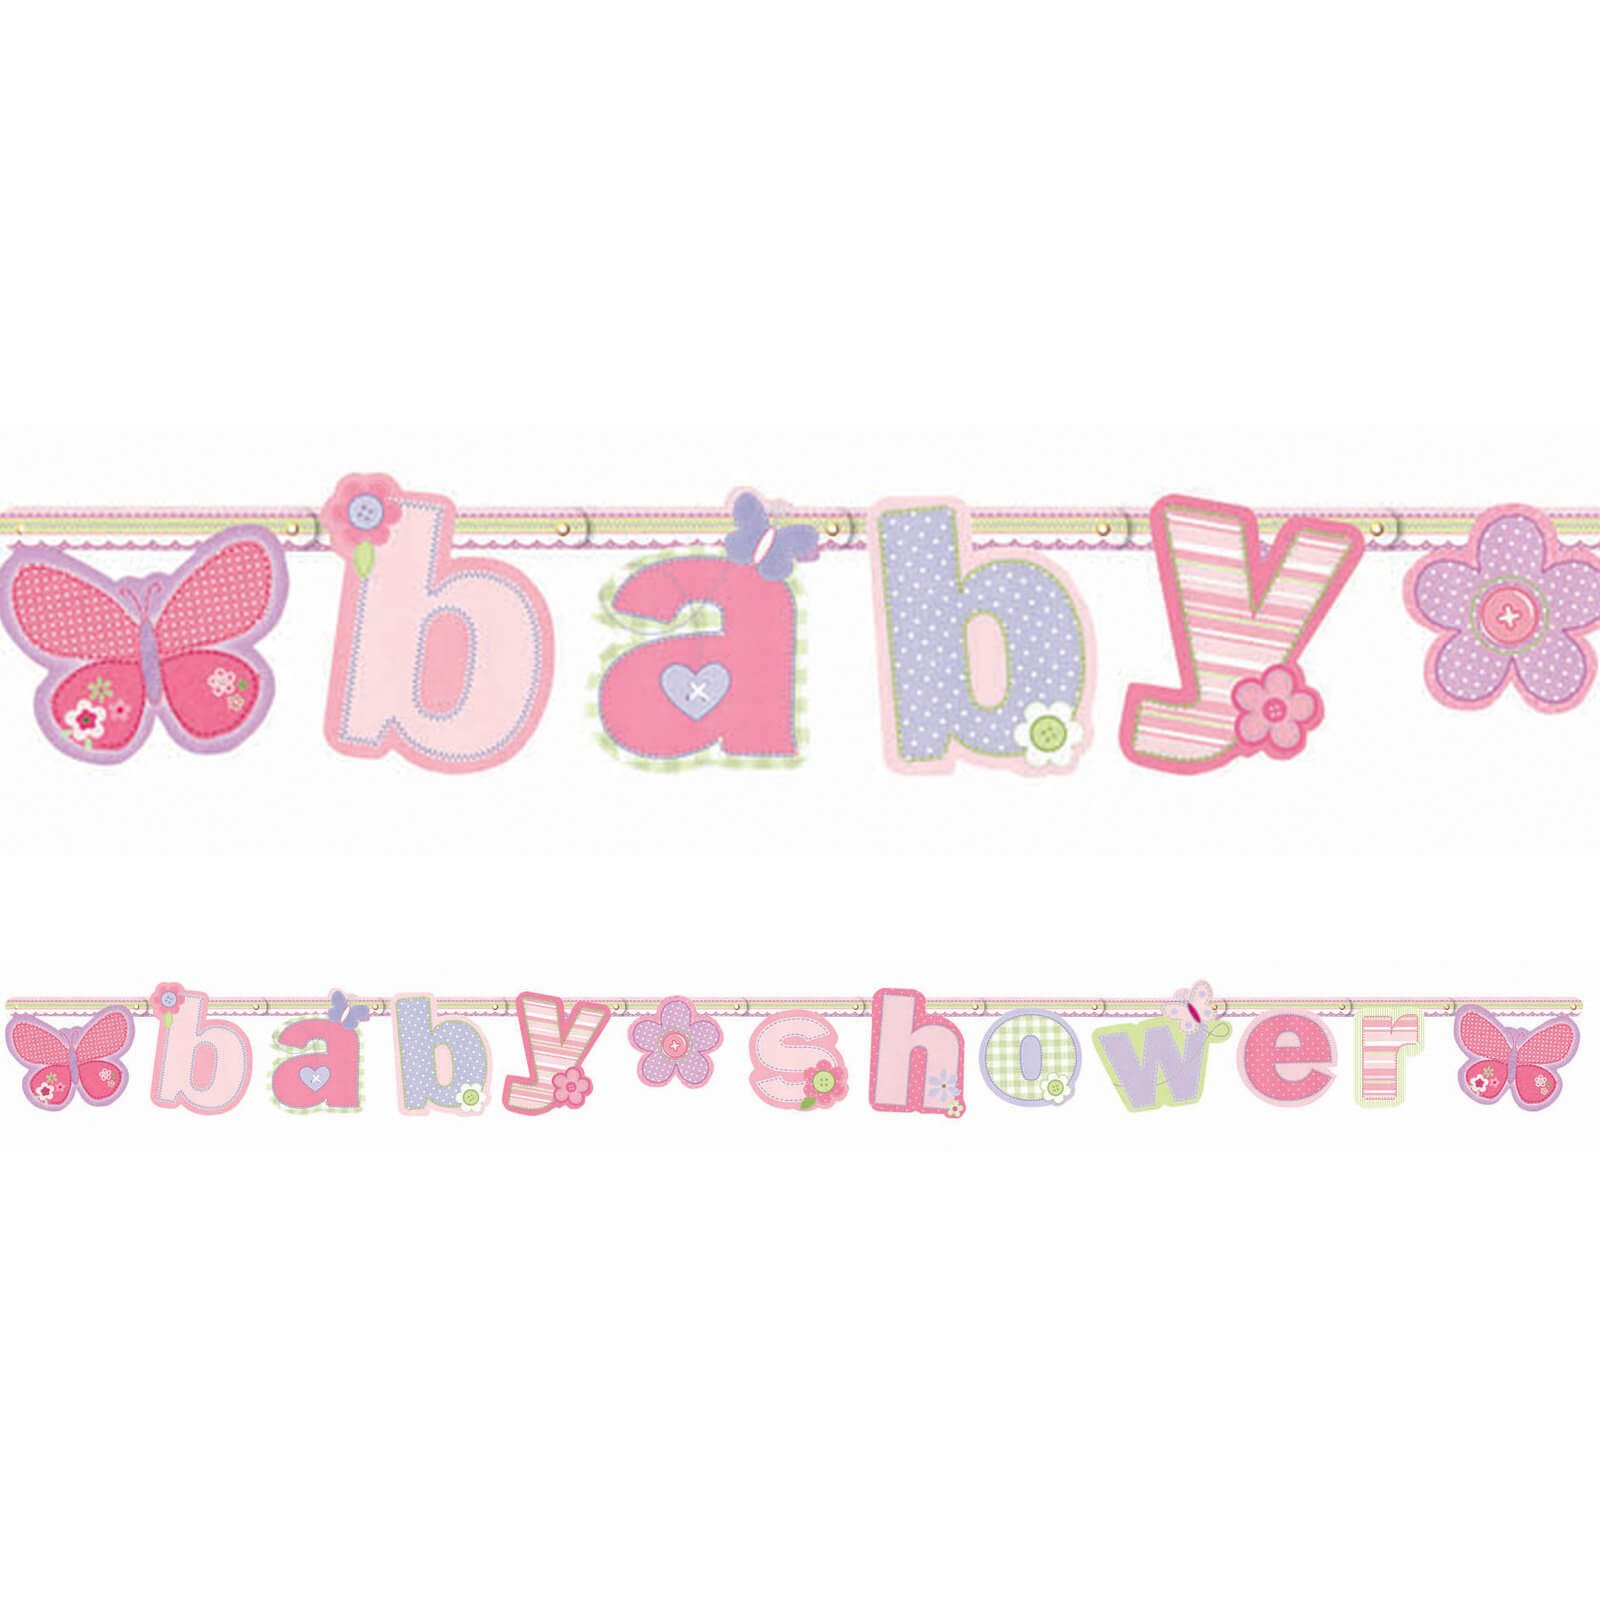 034 Bannercolab Template Ideas Baby Shower Banner Fearsome With Diy Baby Shower Banner Template